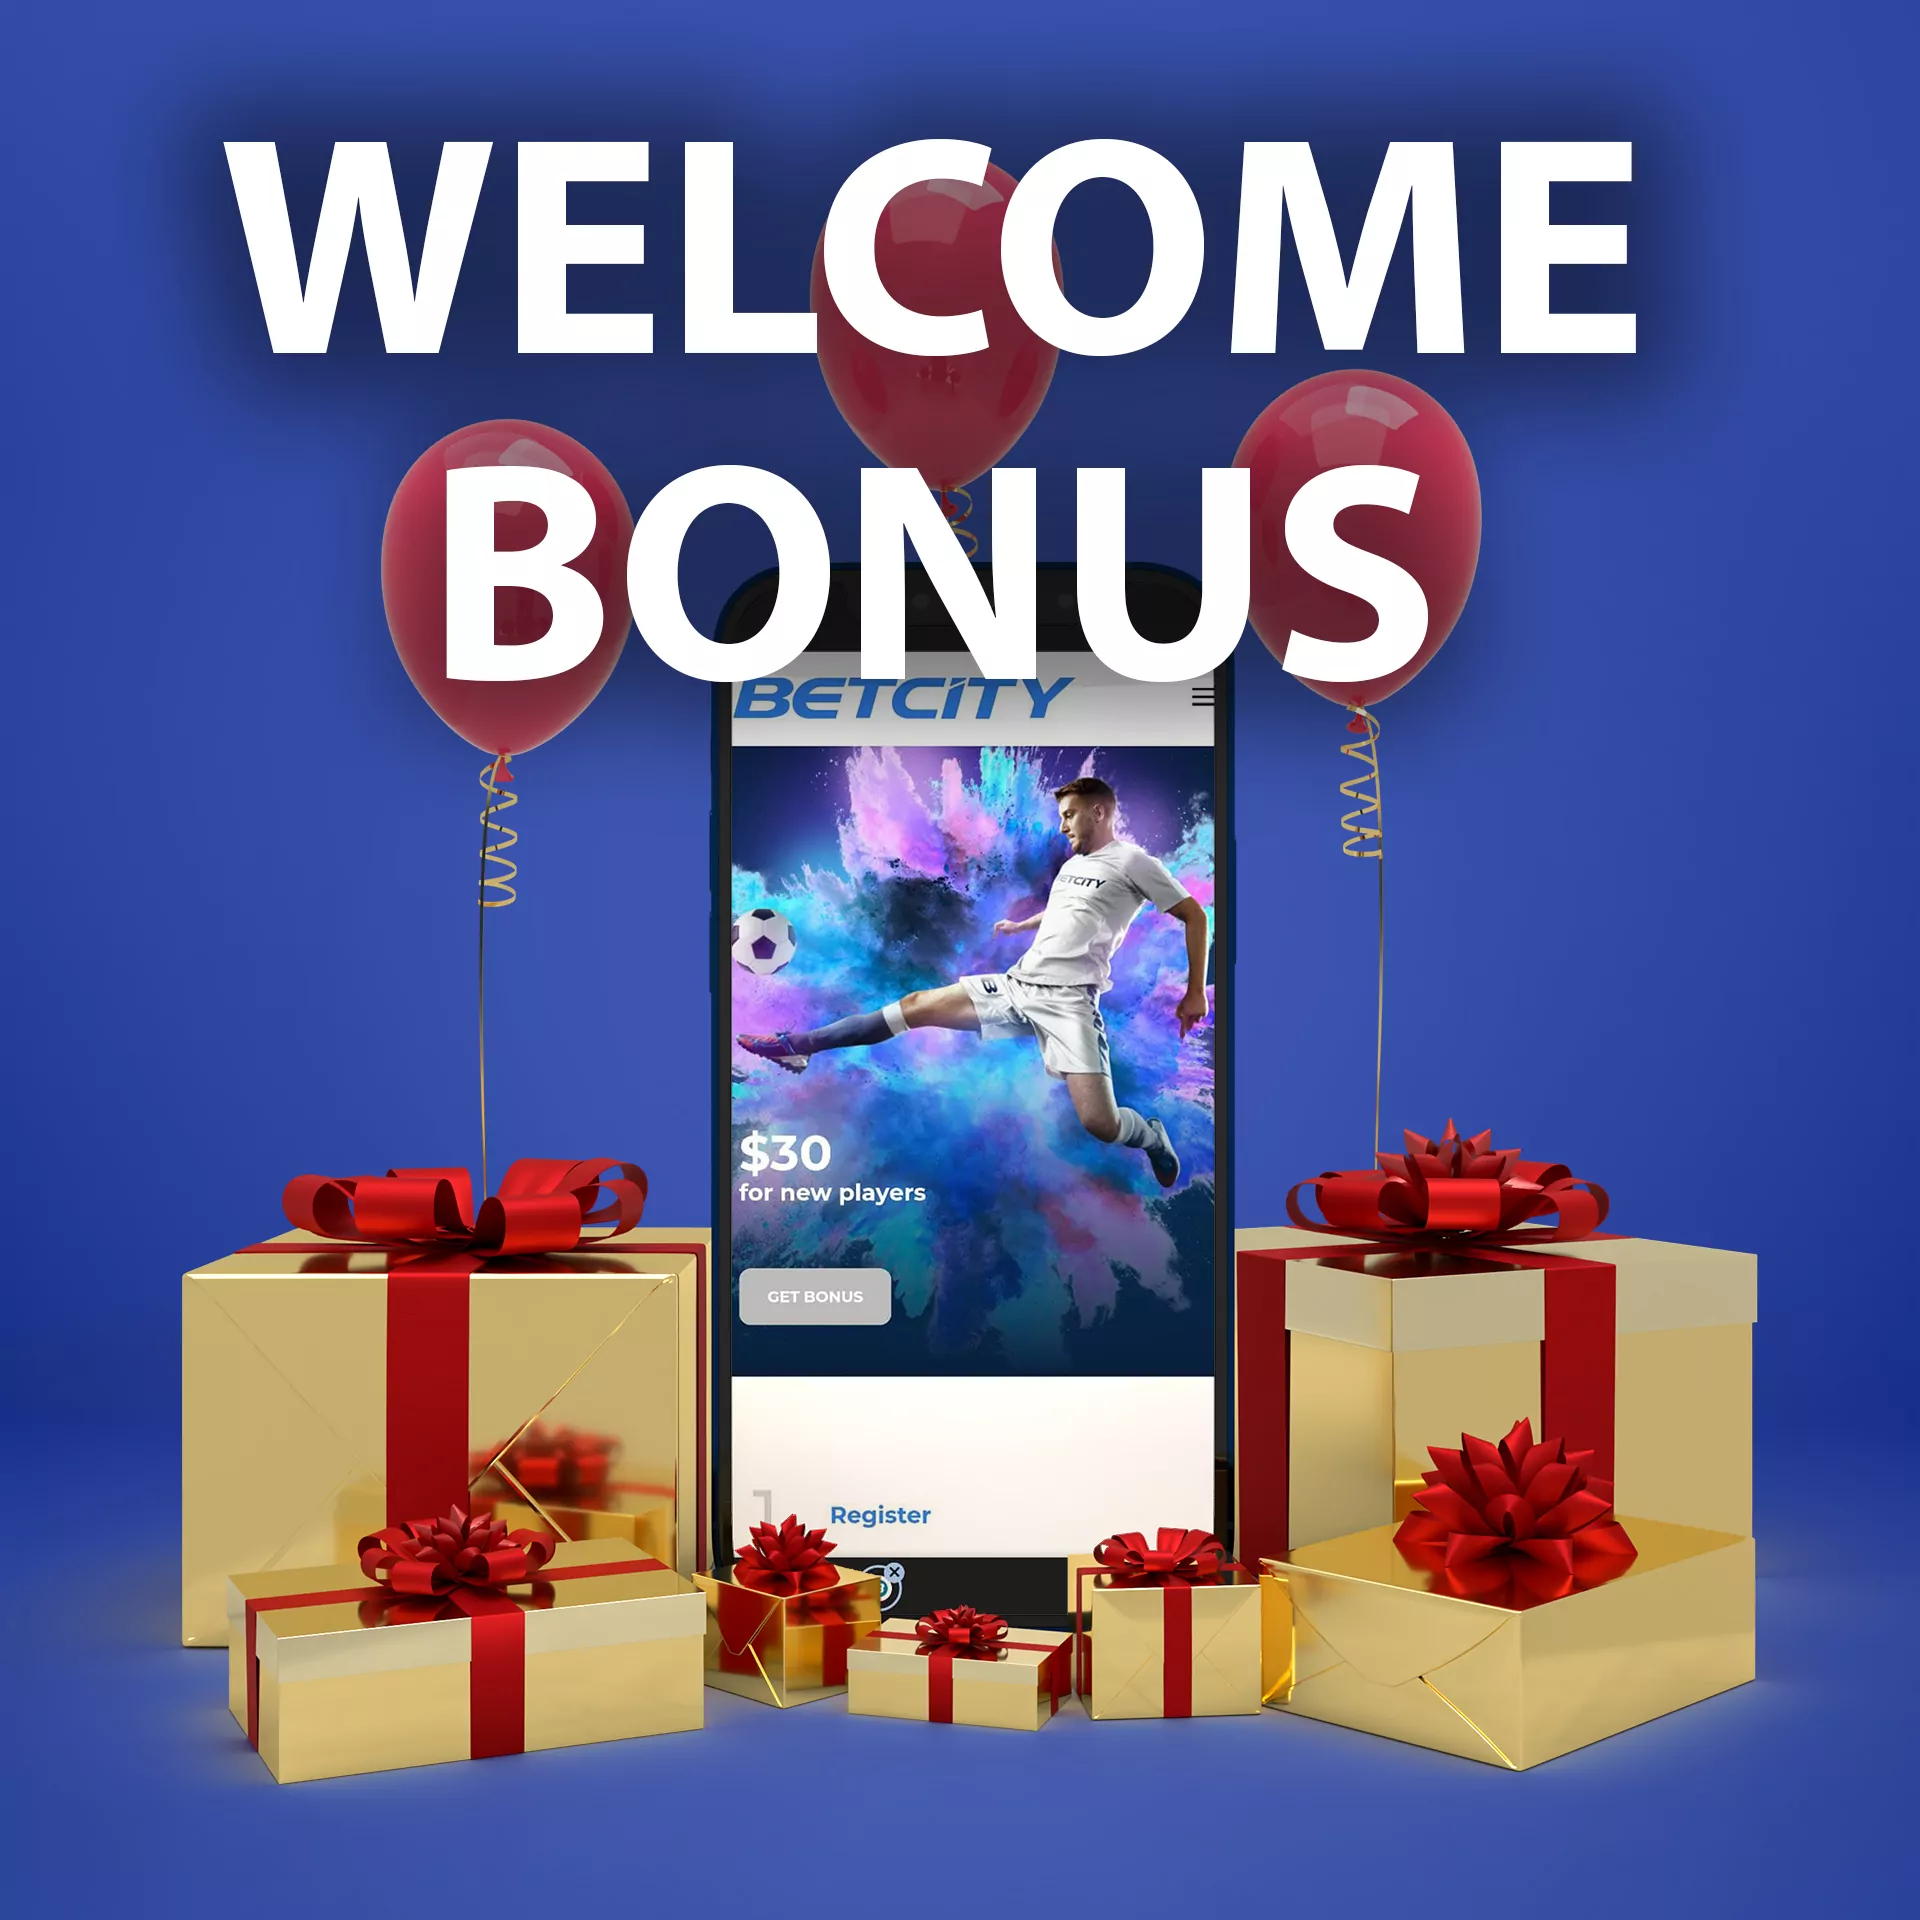 Do not forget to get a welcome bonus while registering.